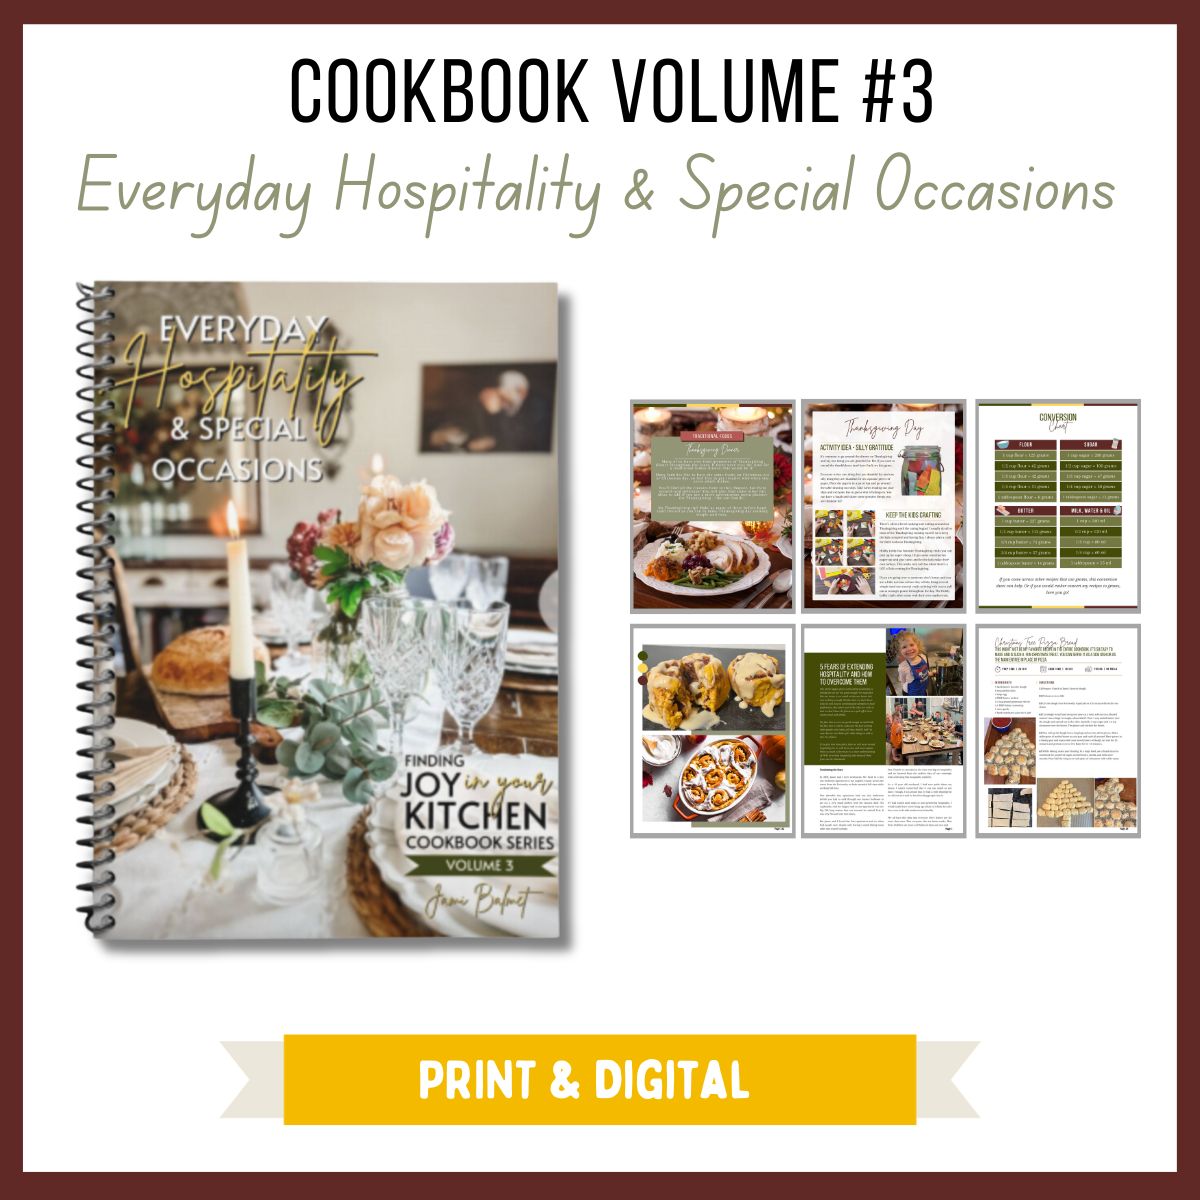 Cookbook Volume 3: Everyday Hospitality & Special Occasions - PRINT